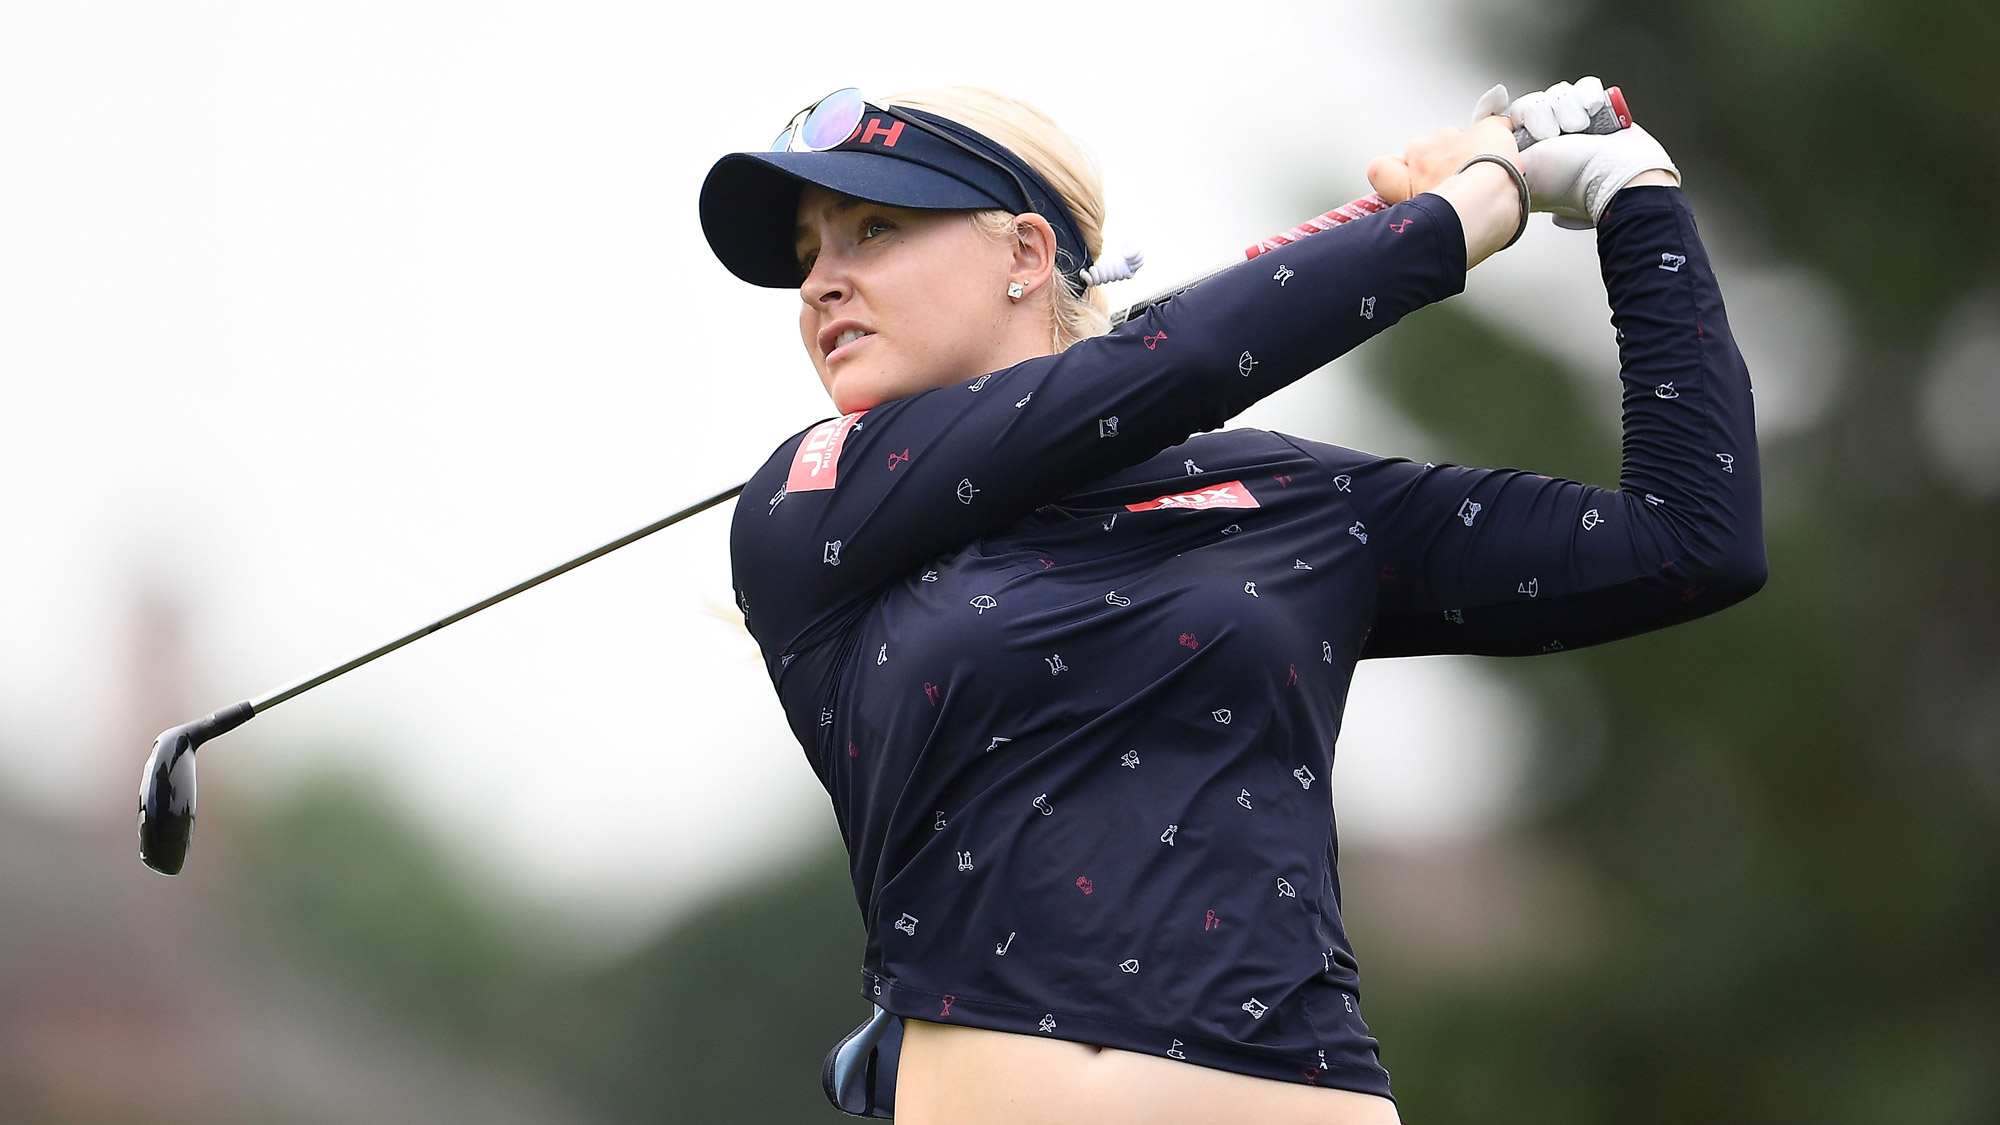 Charley Hull Takes a Rip on Day One in Oneida 